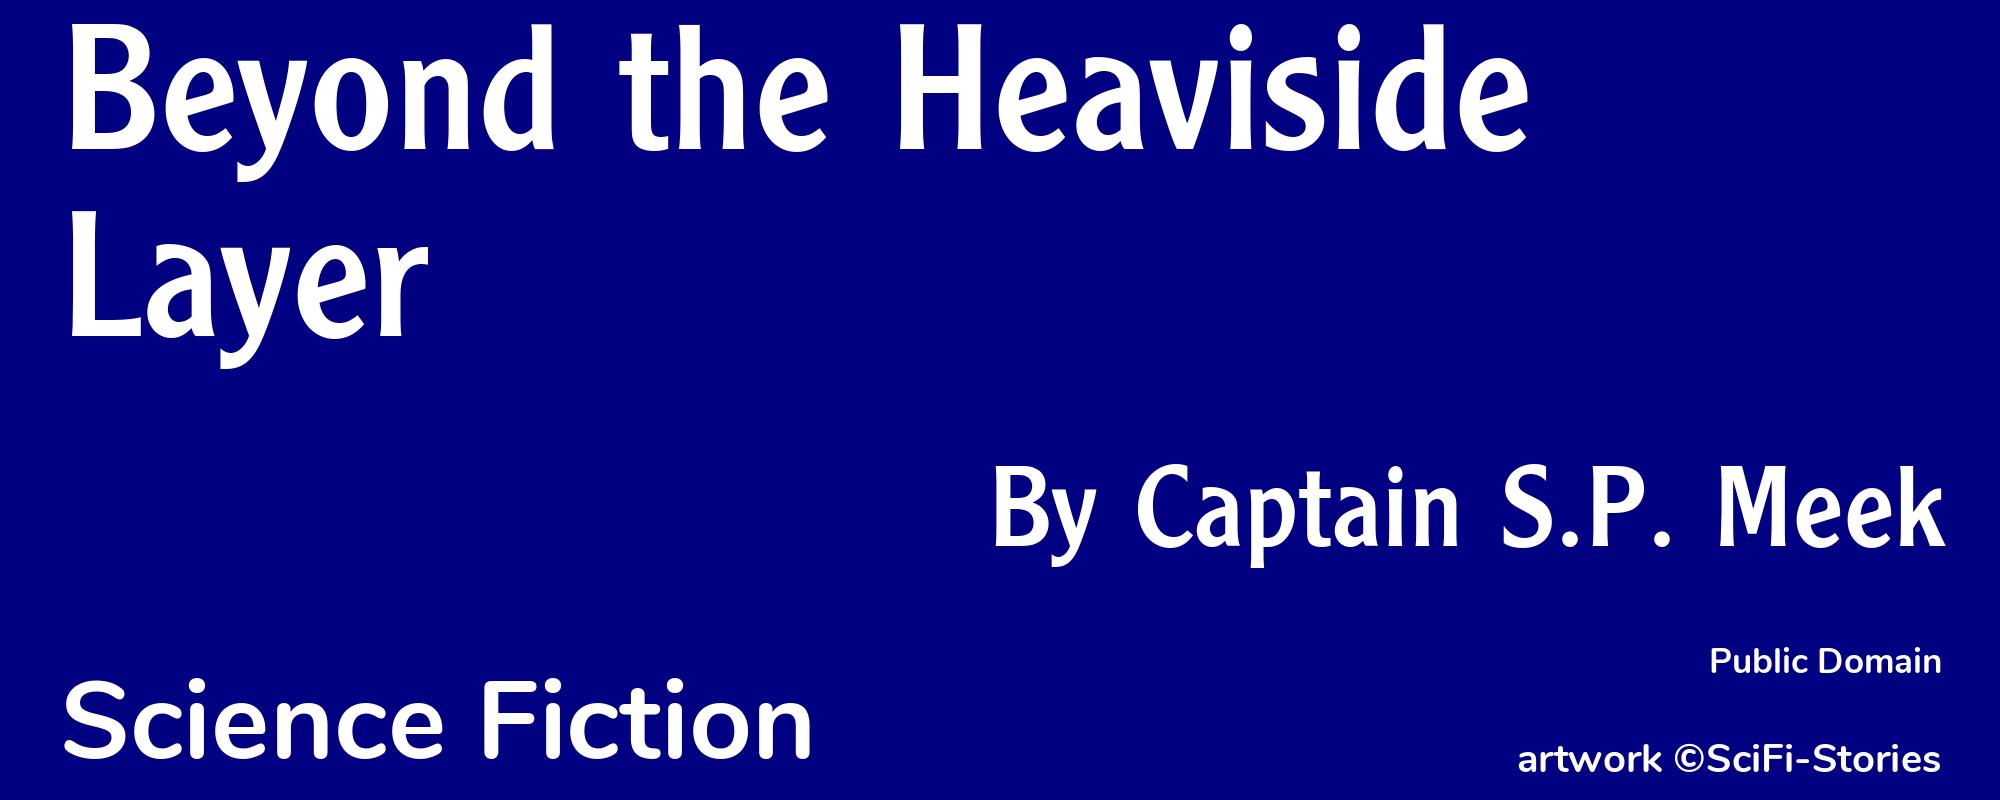 Beyond the Heaviside Layer - Cover